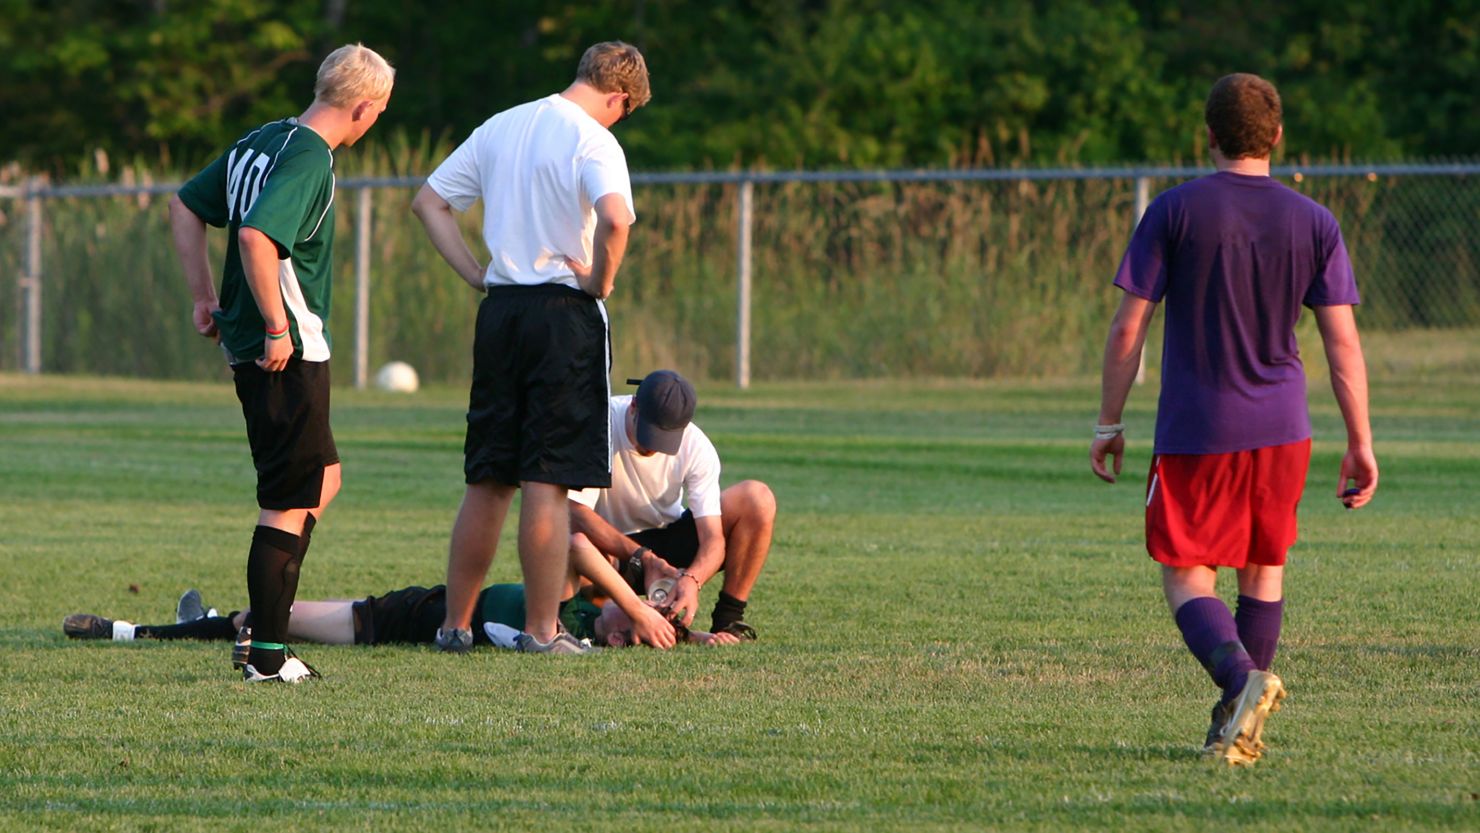 A concussion is classified as a mild traumatic brain injury and should be taken seriously, according to Julie Stamm, a clinical assistant professor at the University of Wisconsin-Madison.